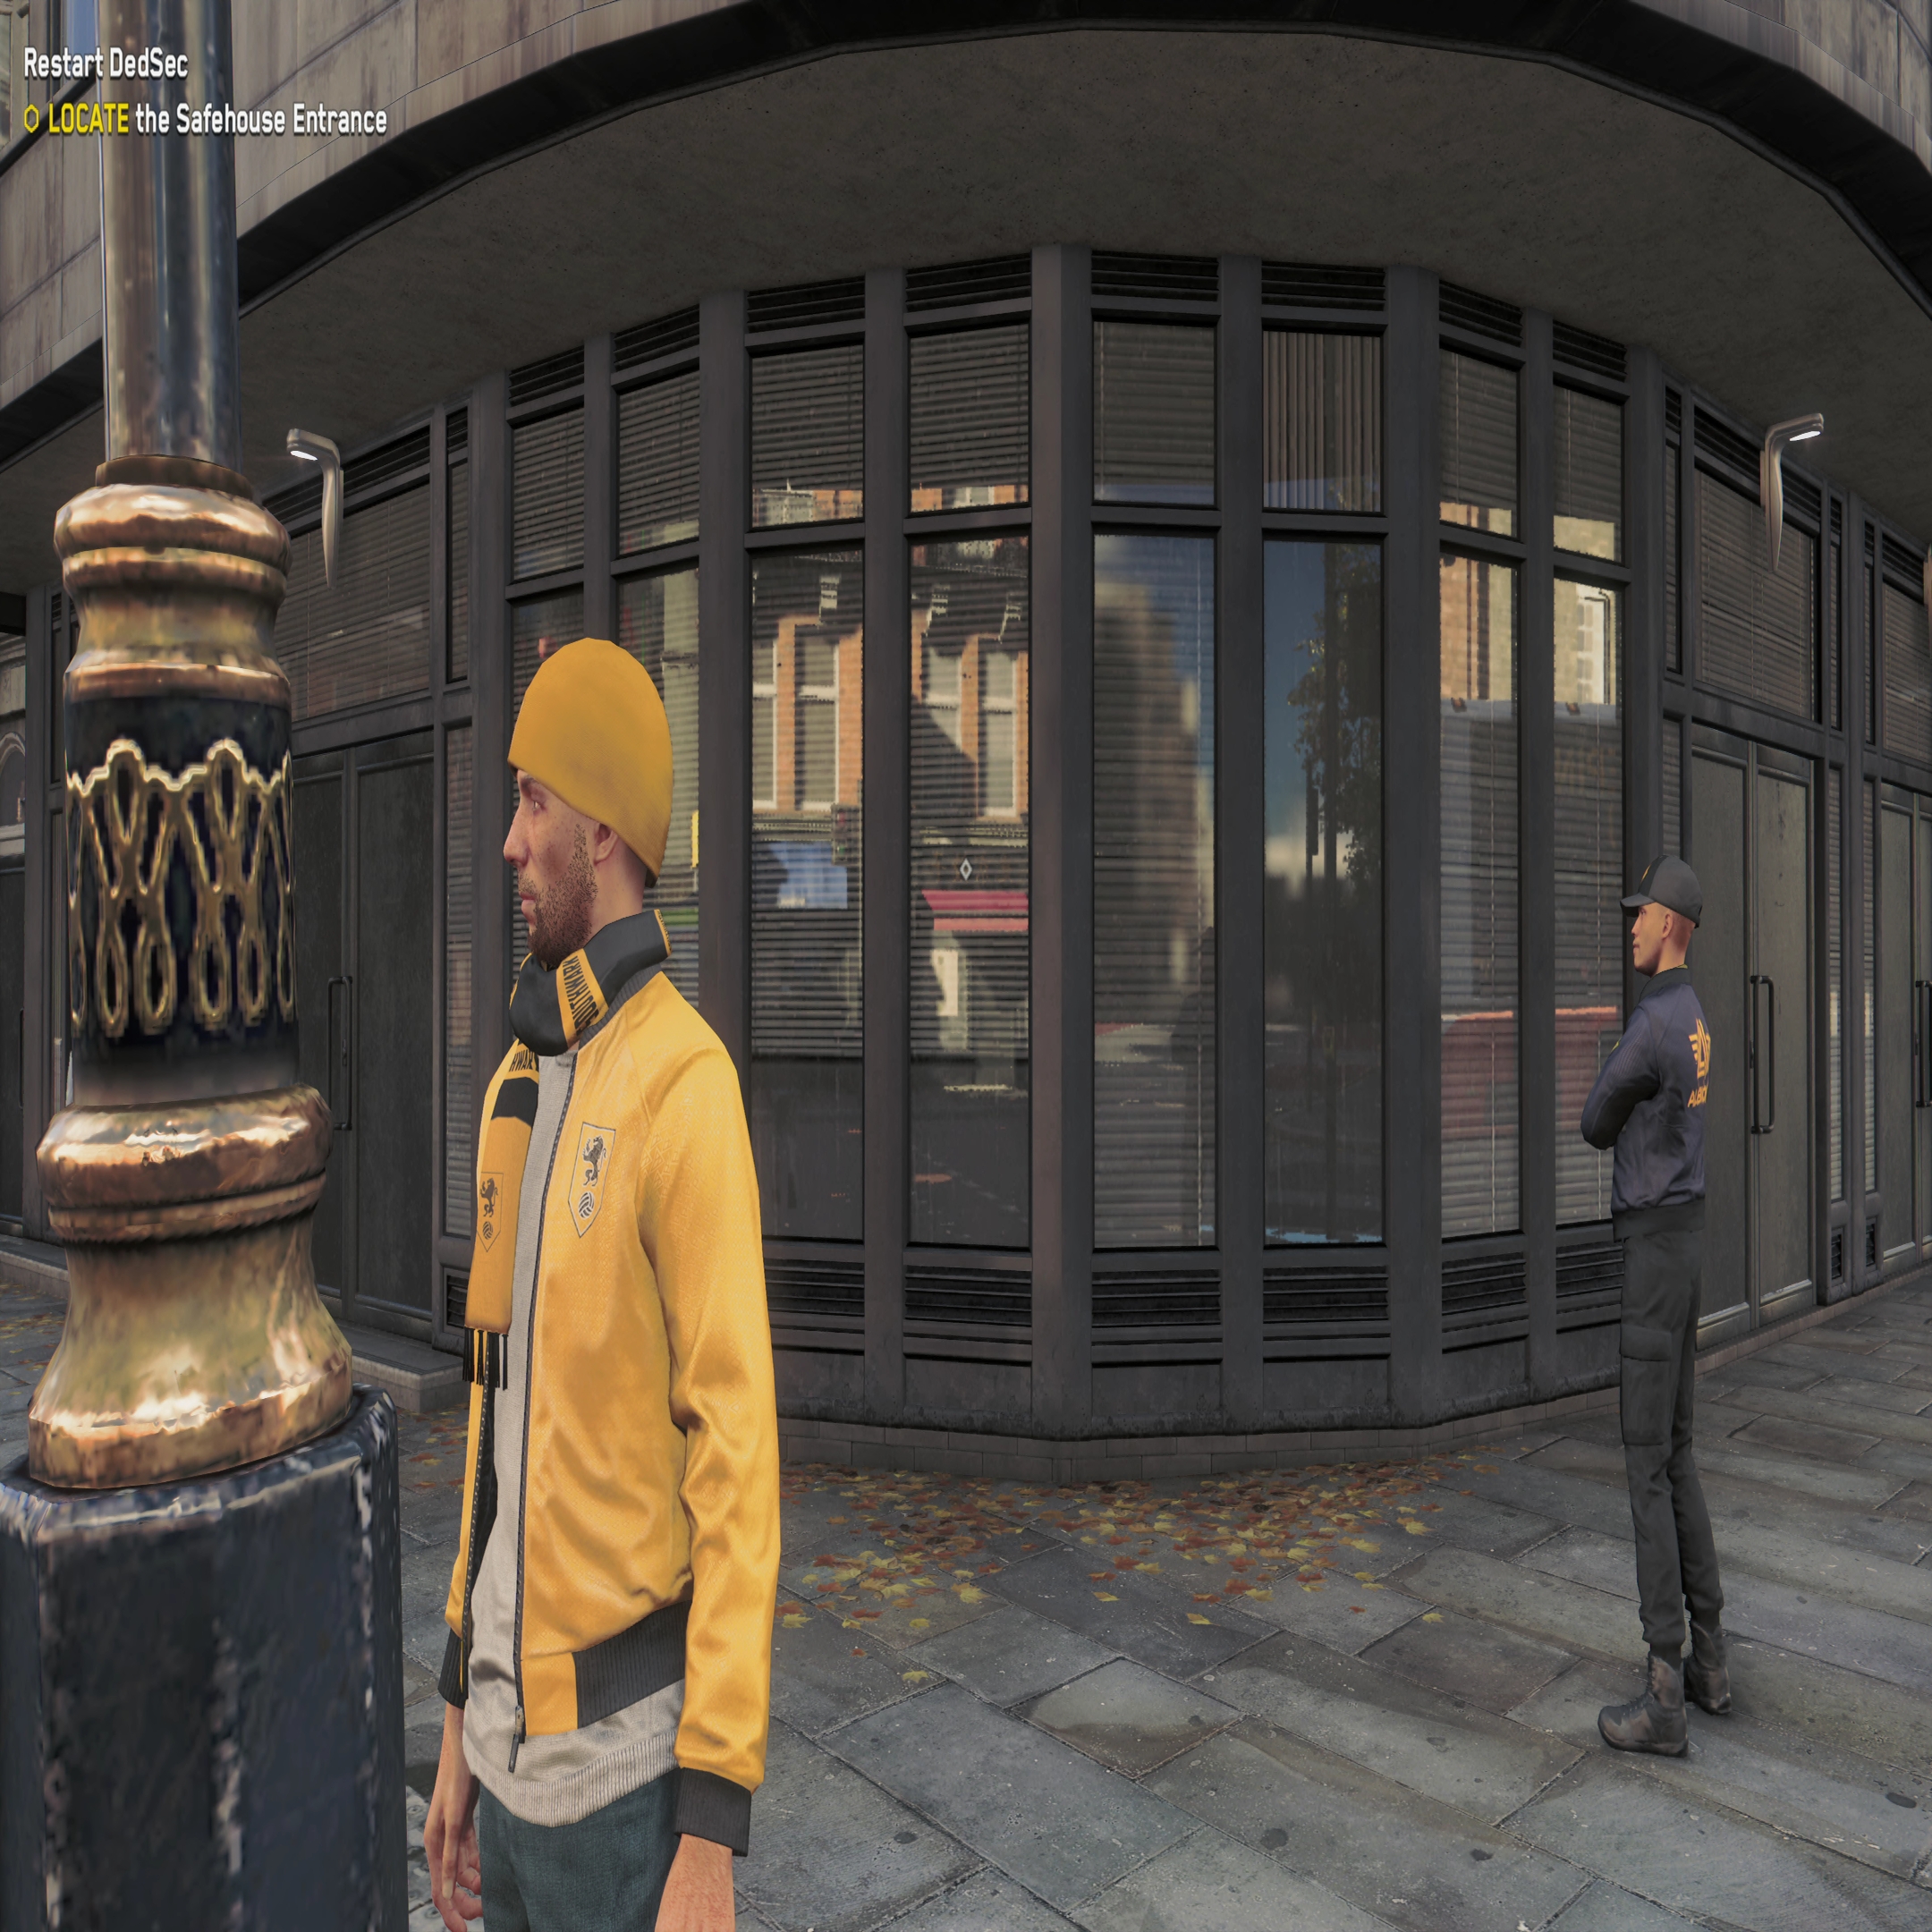 Watch Dogs Legion shows impressive ray tracing in PS5 and Xbox Series X  comparison